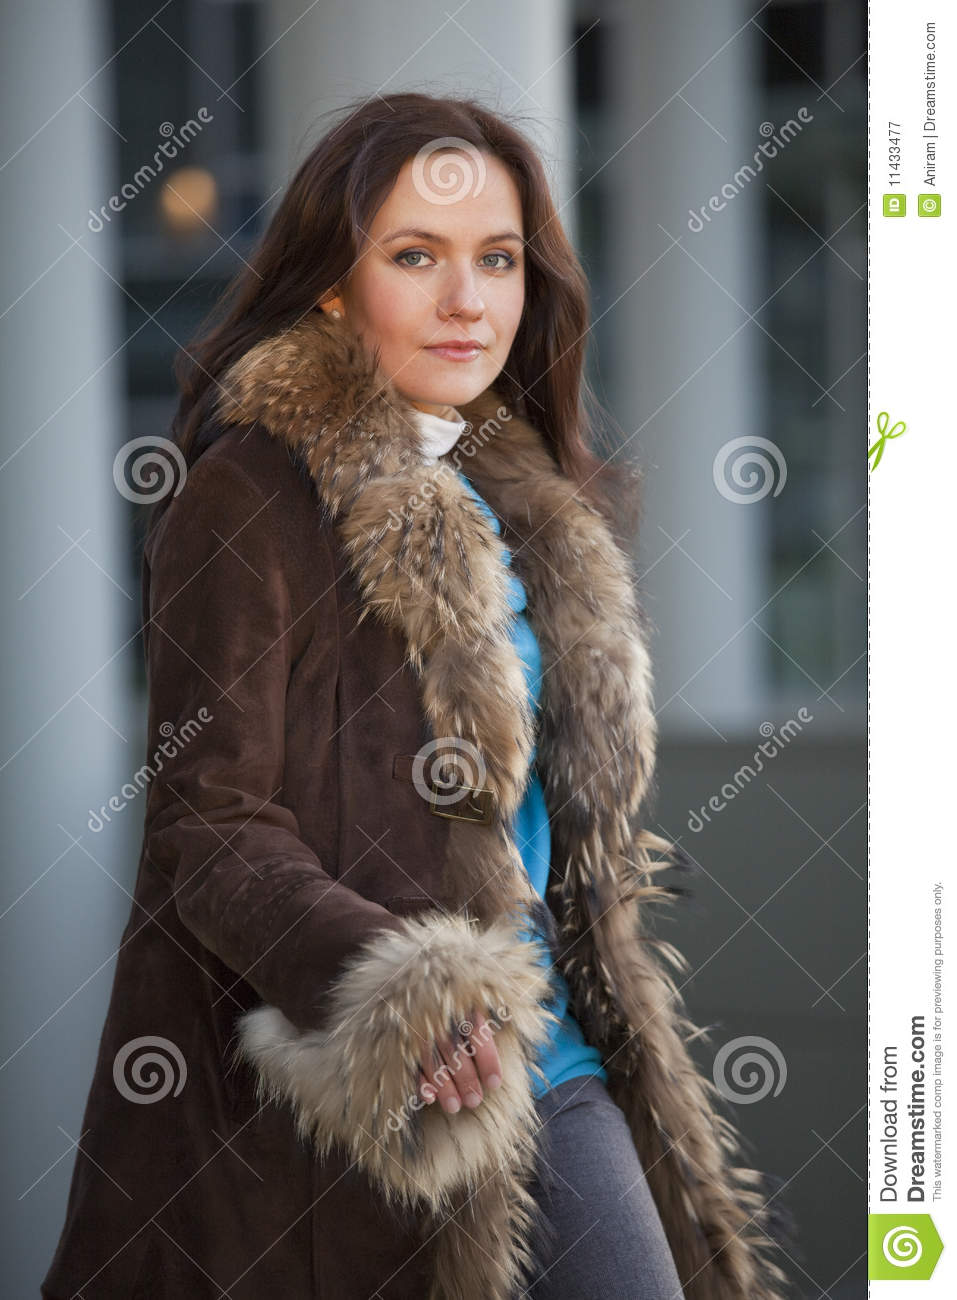 Fashion Woman In Fur Coat On The Street Royalty Free Stock Photography